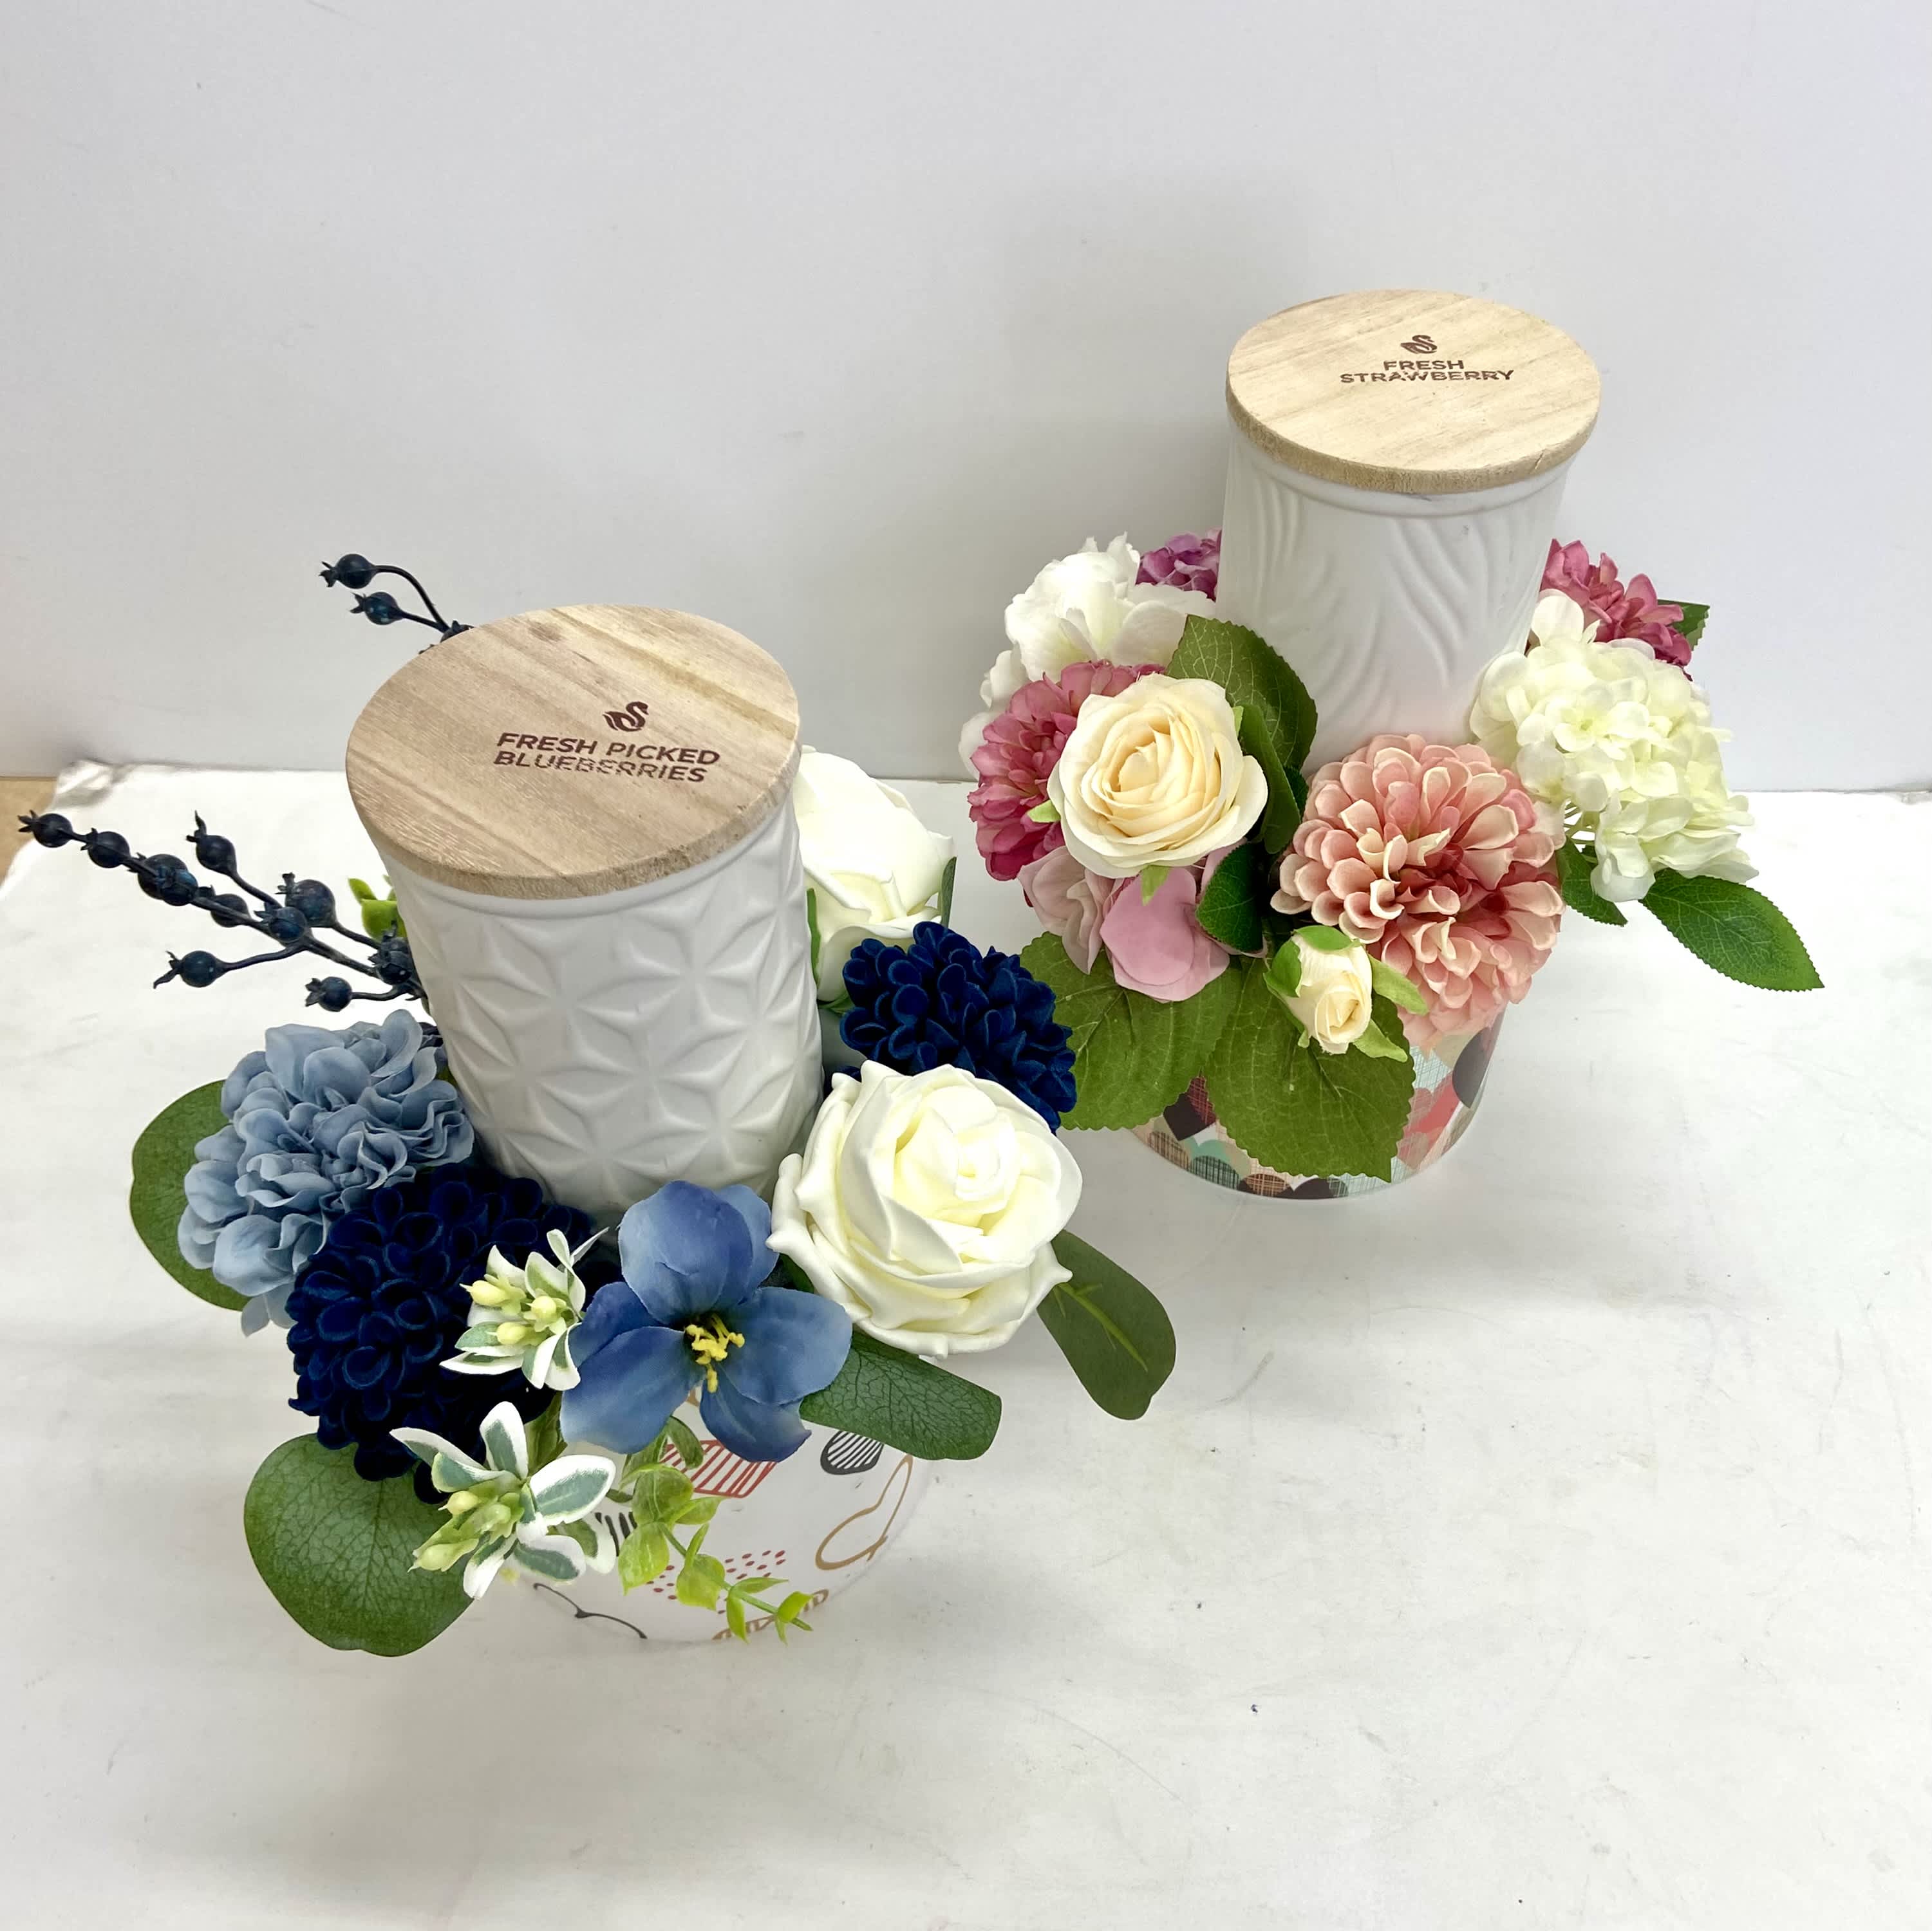 Swan Creek Soy Candles - Swan Creek soy candles in new fragrances Modern Lilac and Sunkissed Linen,Fresh Blueberry, classics like Citrus &amp; Sage and Fresh Strawberry. Surrounded by permanent flowers matching the fragrance.